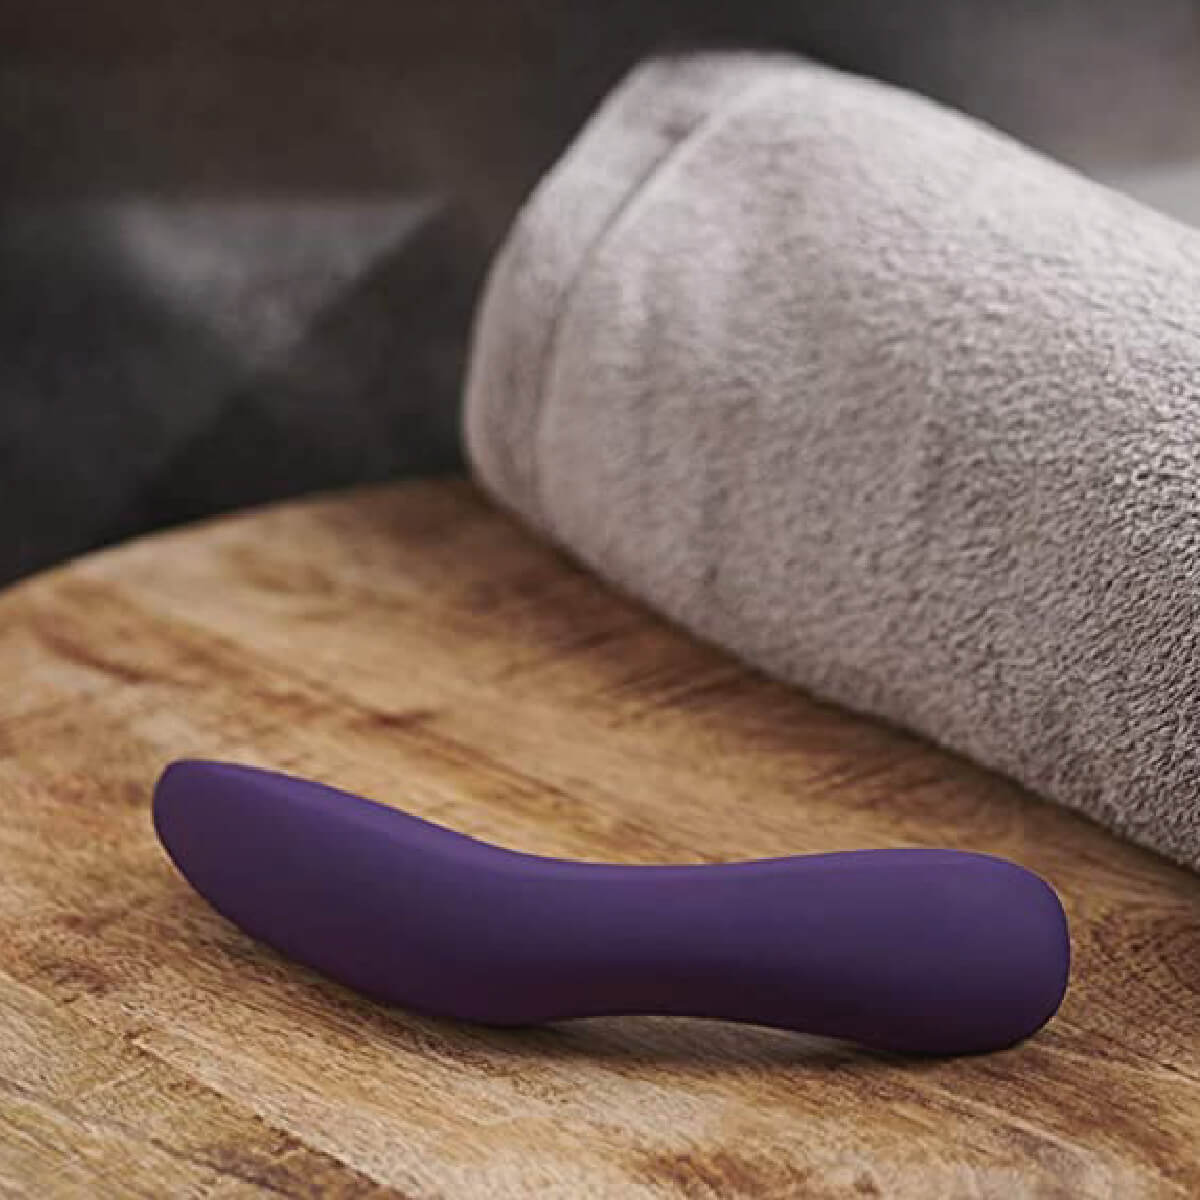 The satisfying G-Spot pleasure vibrator Rave by We-Vibe - Product image